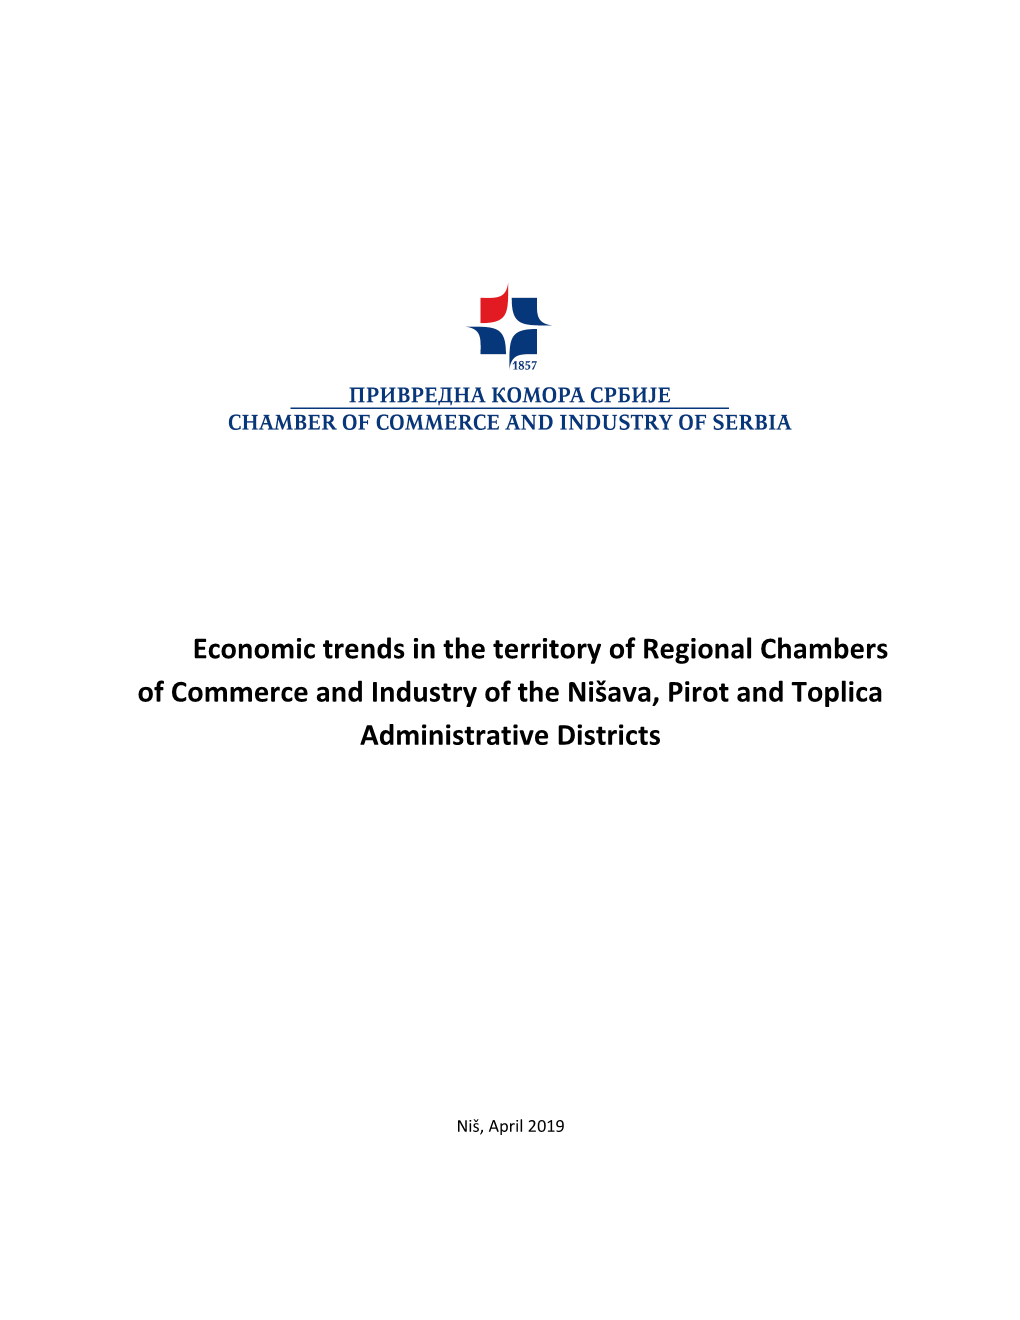 Economic Trends in the Territory of Regional Chambers of Commerce and Industry of the Nišava, Pirot and Toplica